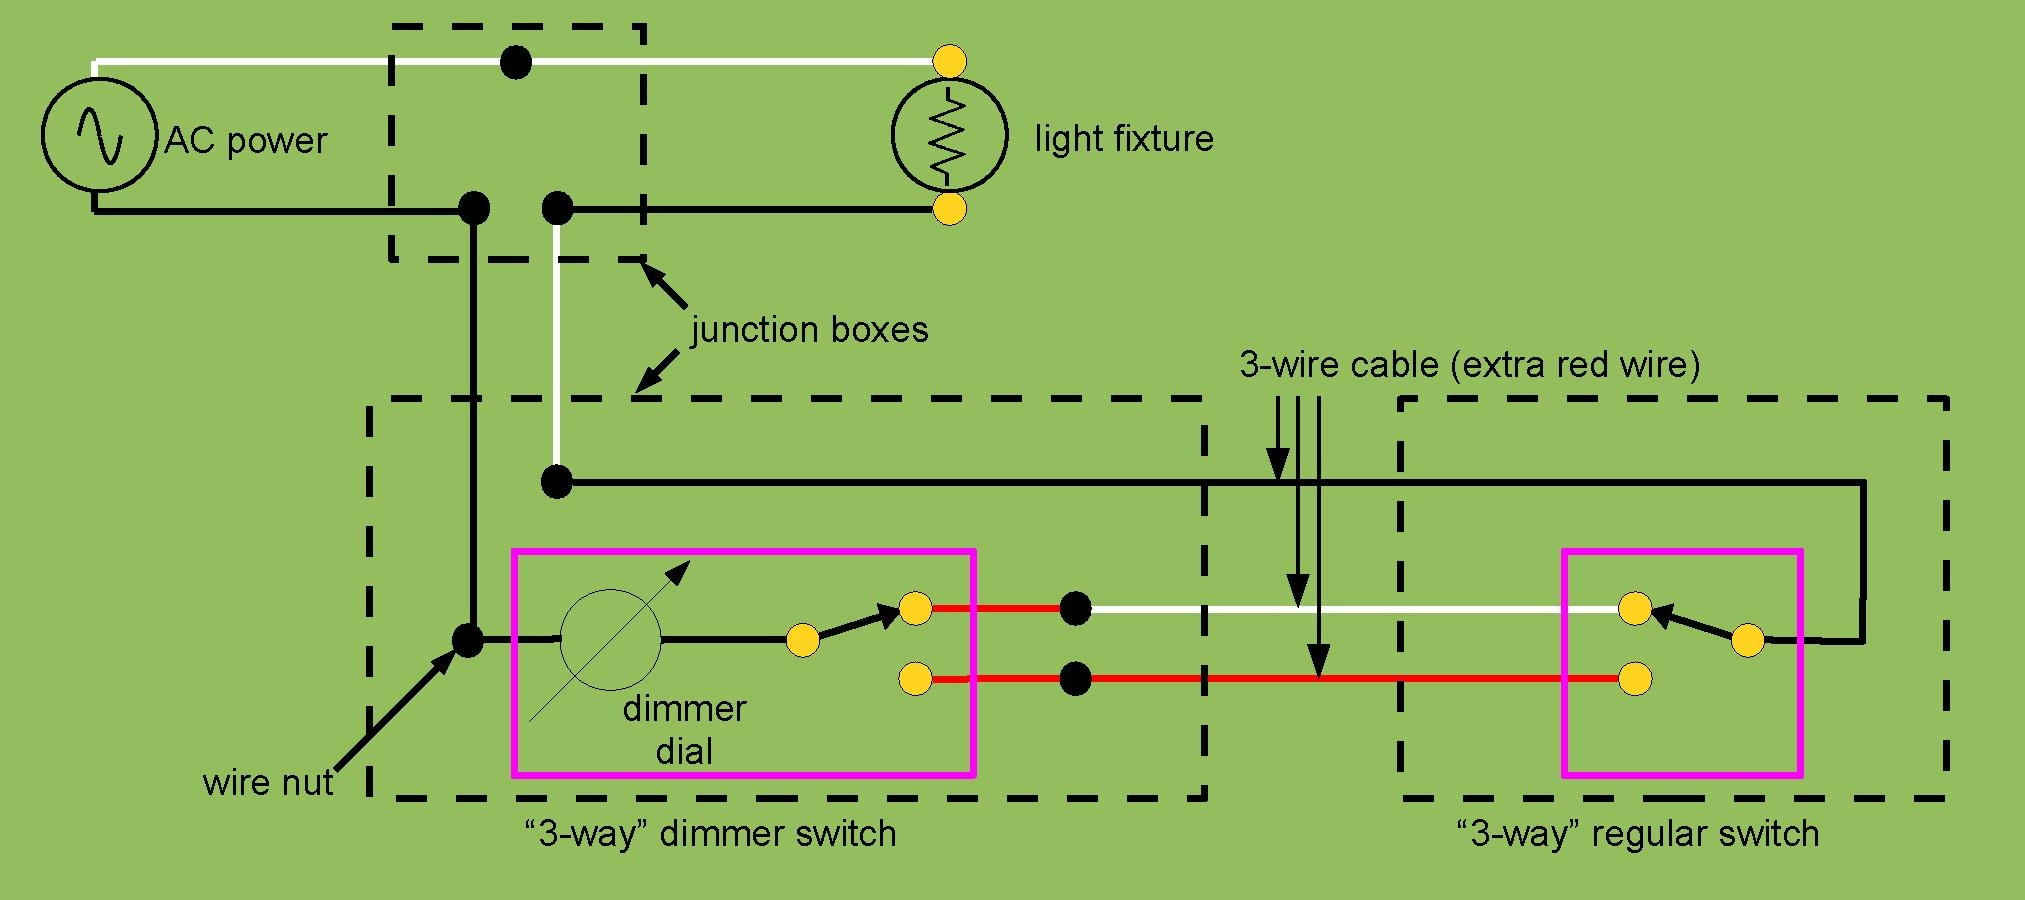 File:3-Way Dimmer Switch Wiring.pdf - Wikimedia Commons - Dimmer Switch Wiring Diagram